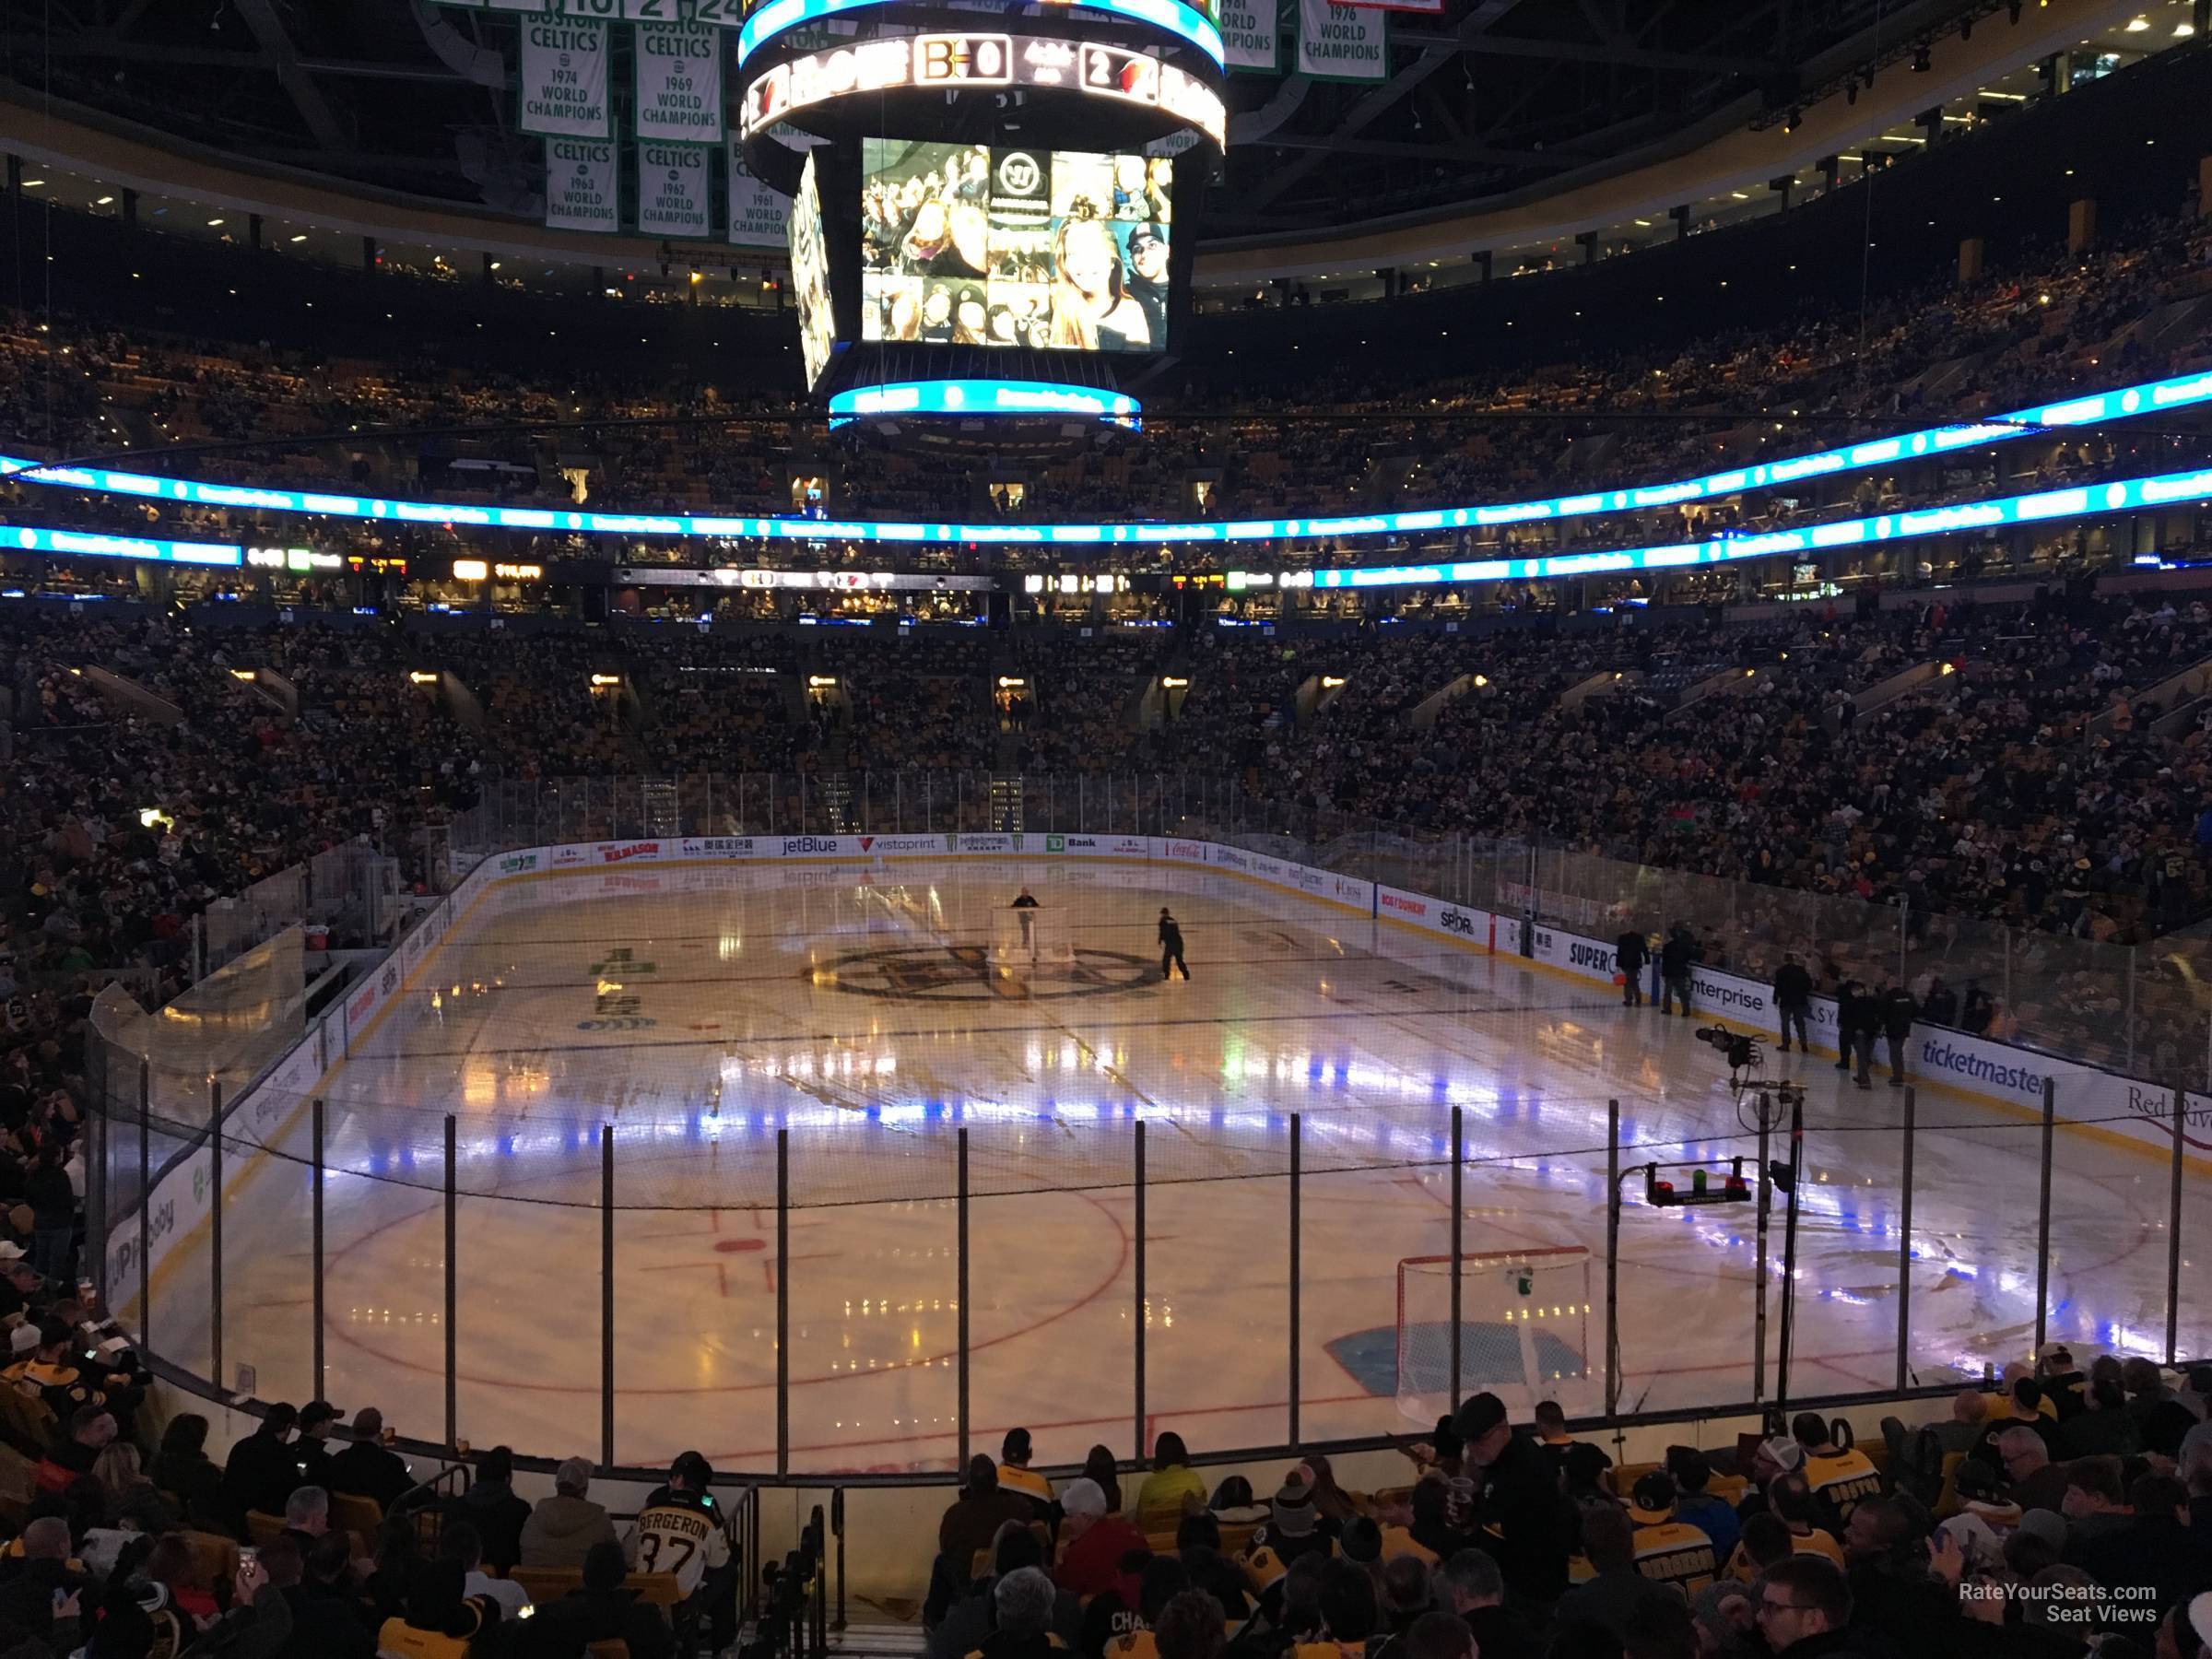 loge 18, row 15 seat view  for hockey - td garden